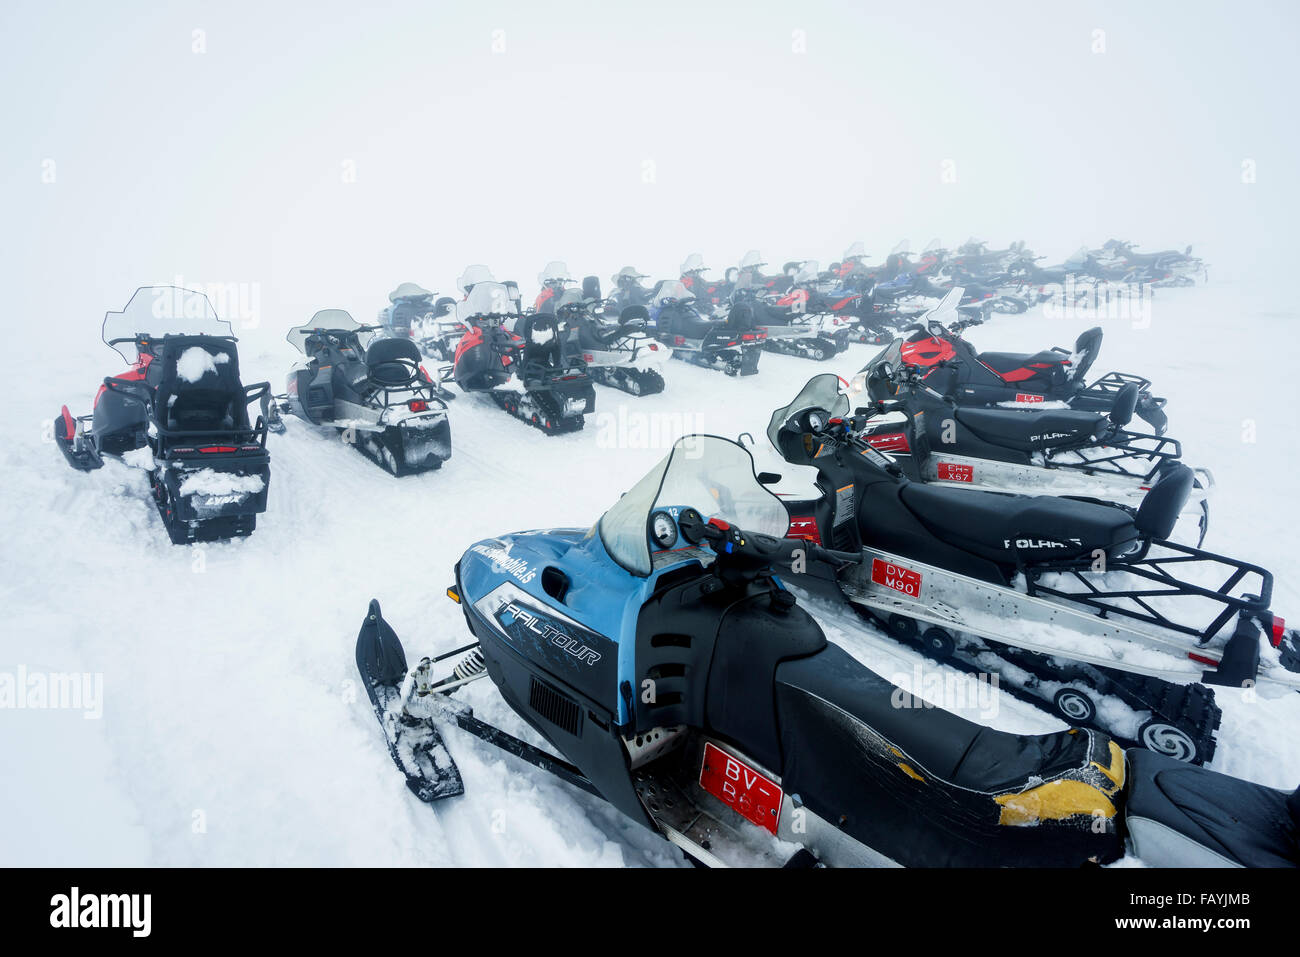 Snowmobiles lined up, snowy day, Iceland Stock Photo